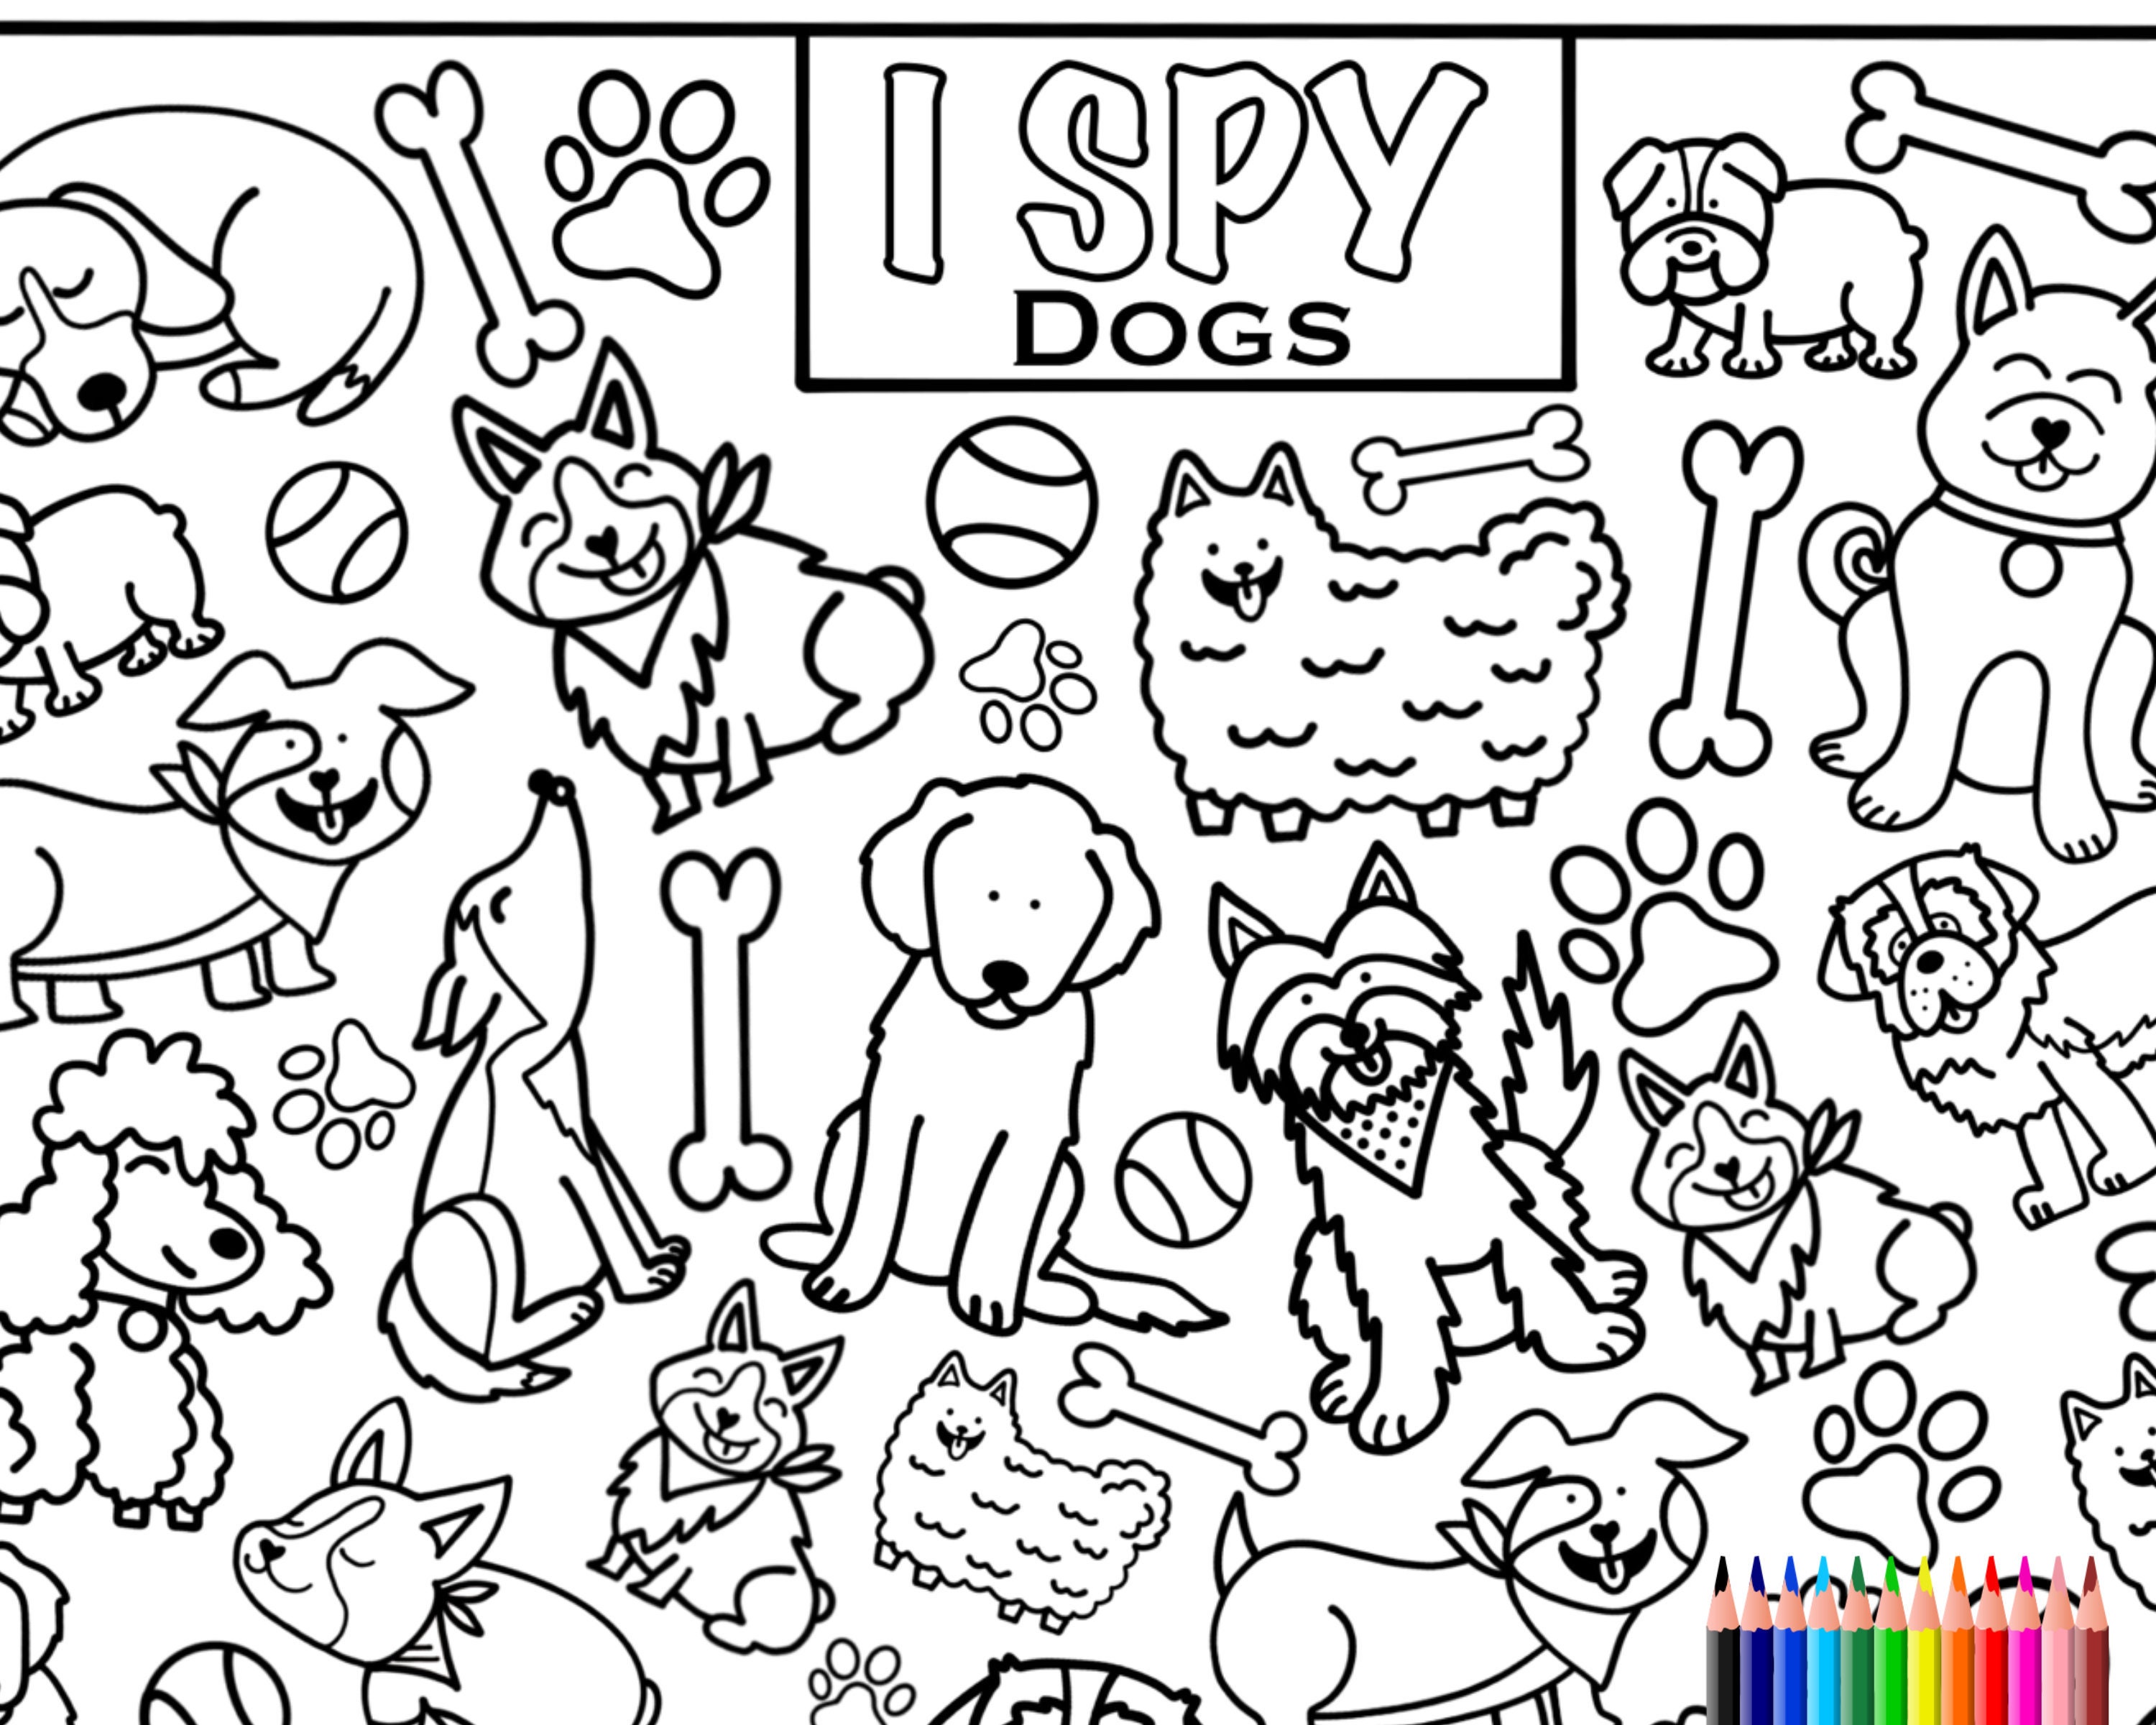 I spy dogs coloring page printout download colouring search and count activity for kids cute dog doodles cartoons different dog breeds